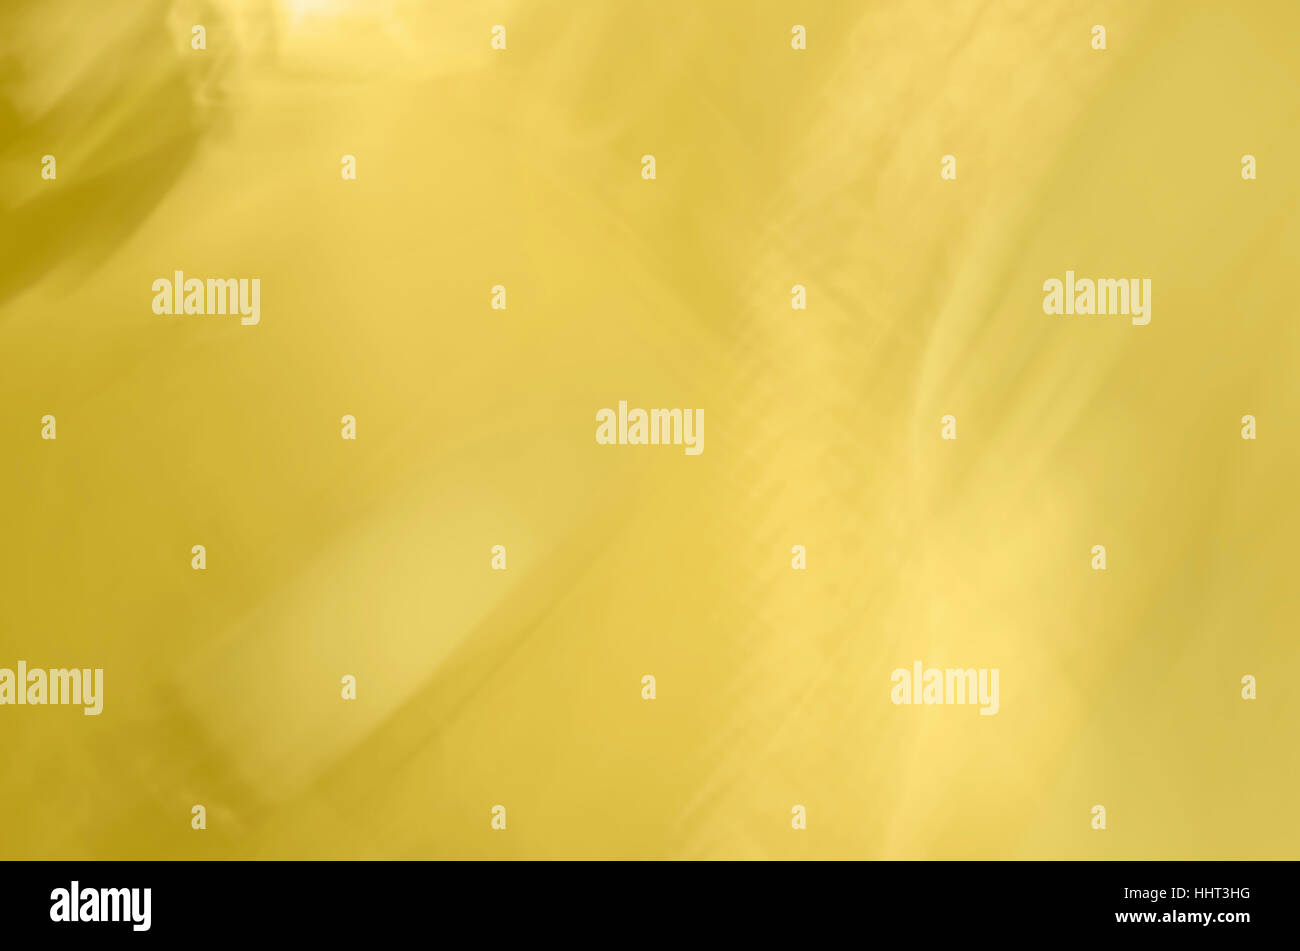 Abstract line background in light gold tone. Stock Photo